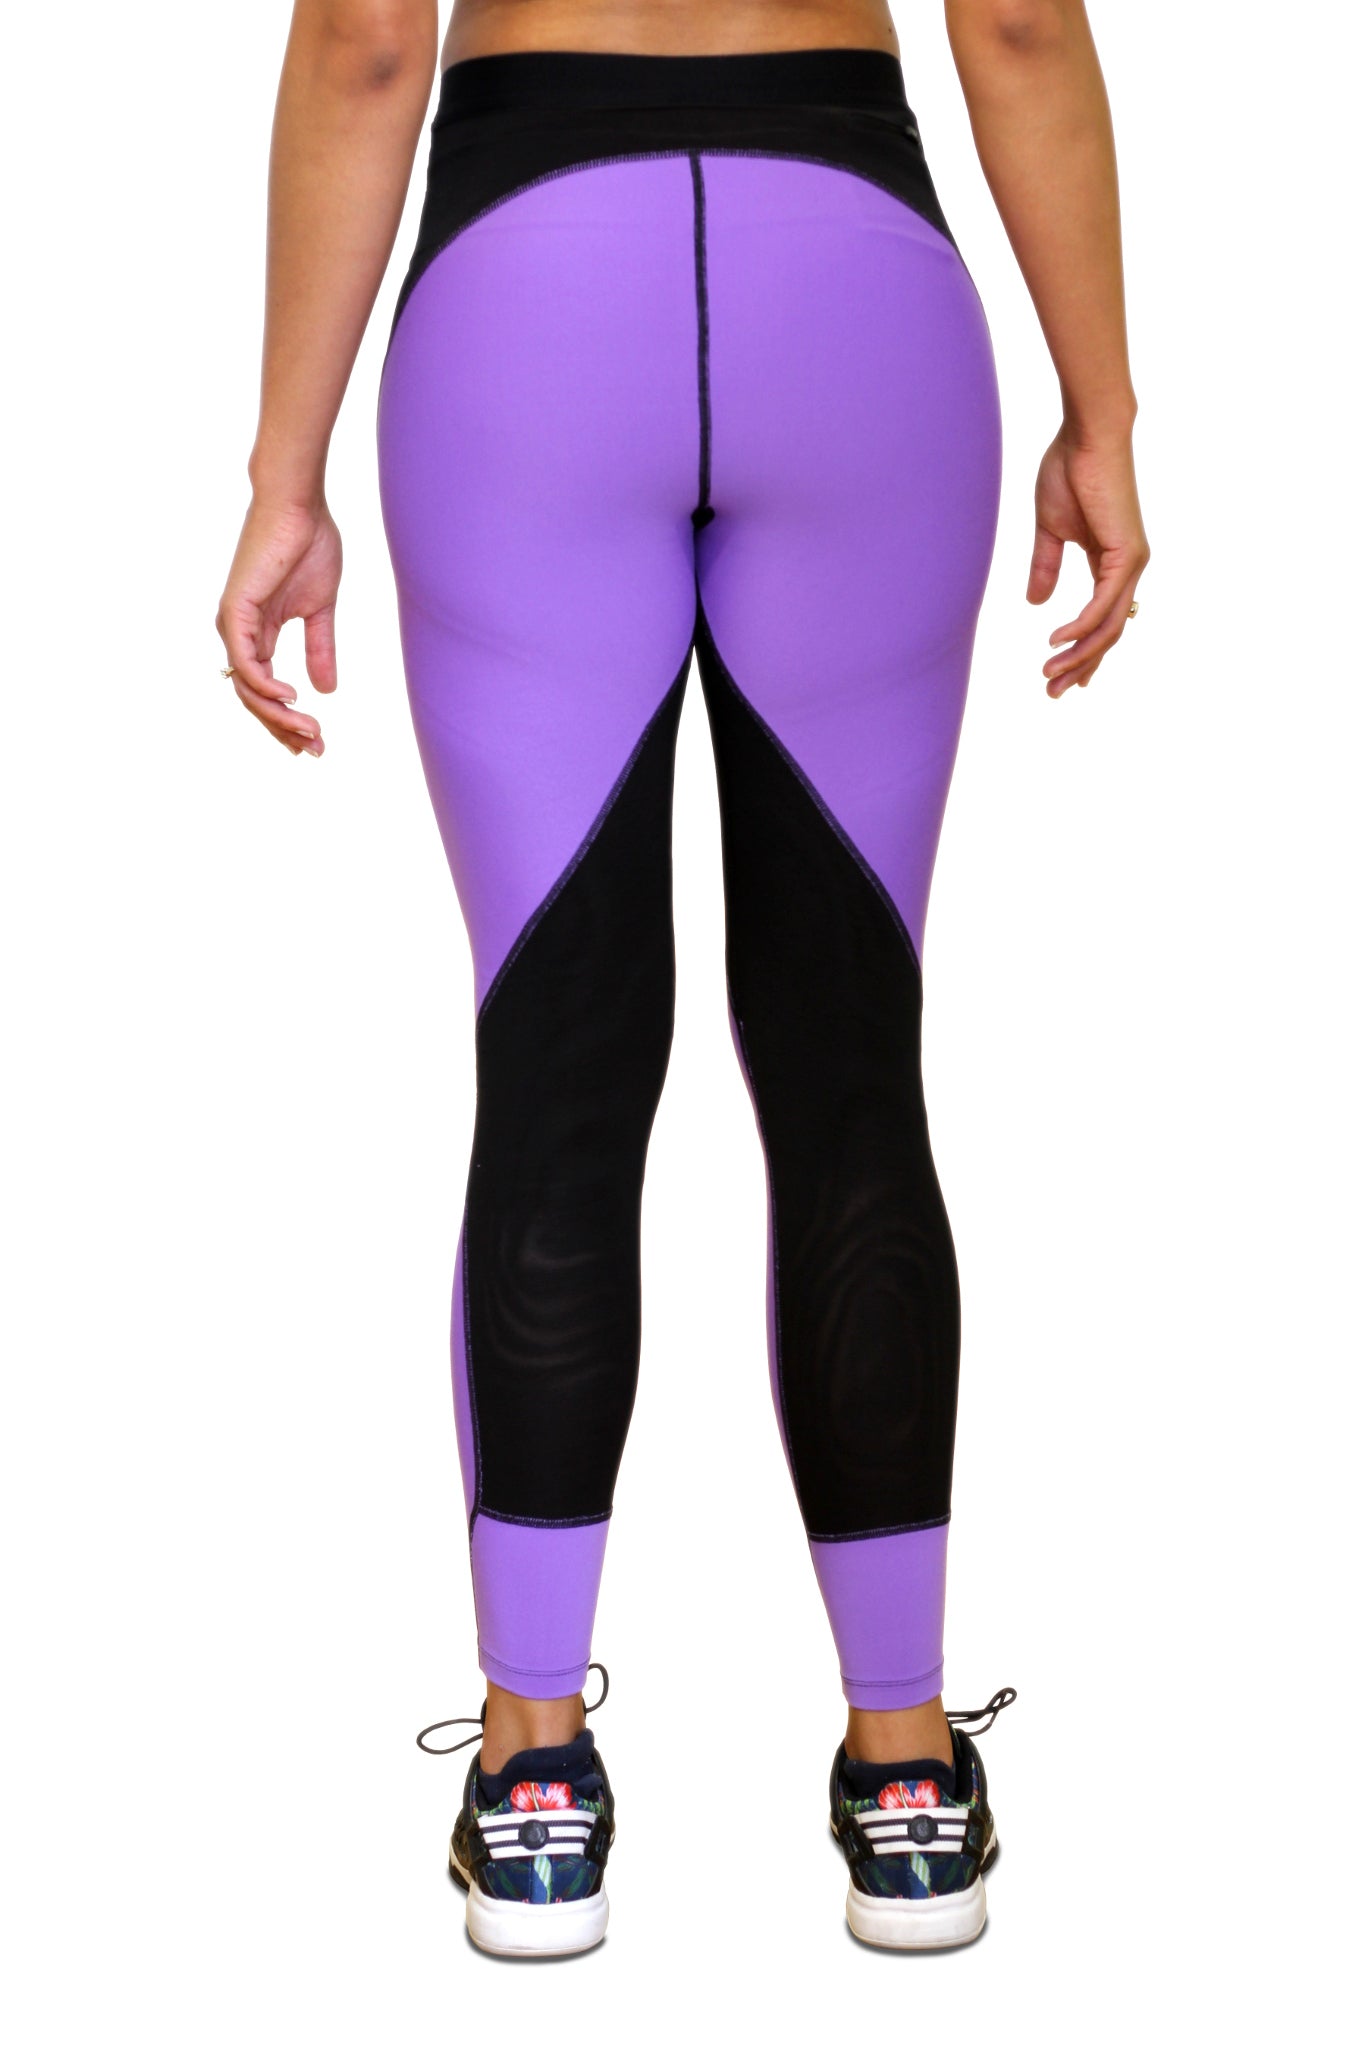 Pro Resistance Tights for Women - Electric Purple